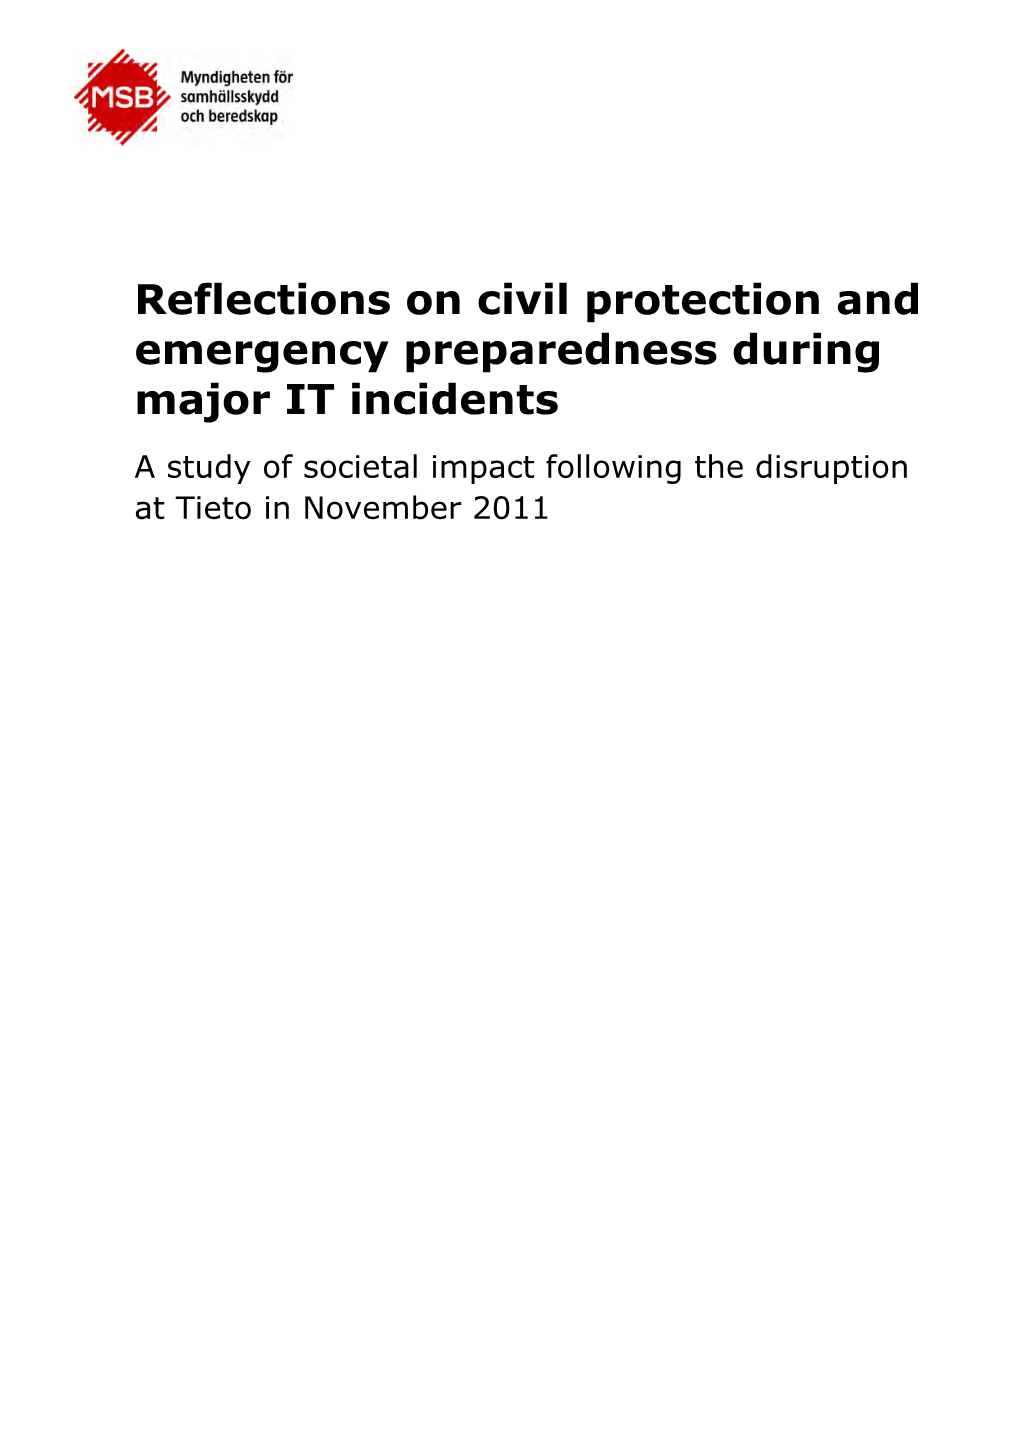 Reflections on Civil Protection and Emergency Preparedness During Major IT Incidents a Study of Societal Impact Following the Disruption at Tieto in November 2011